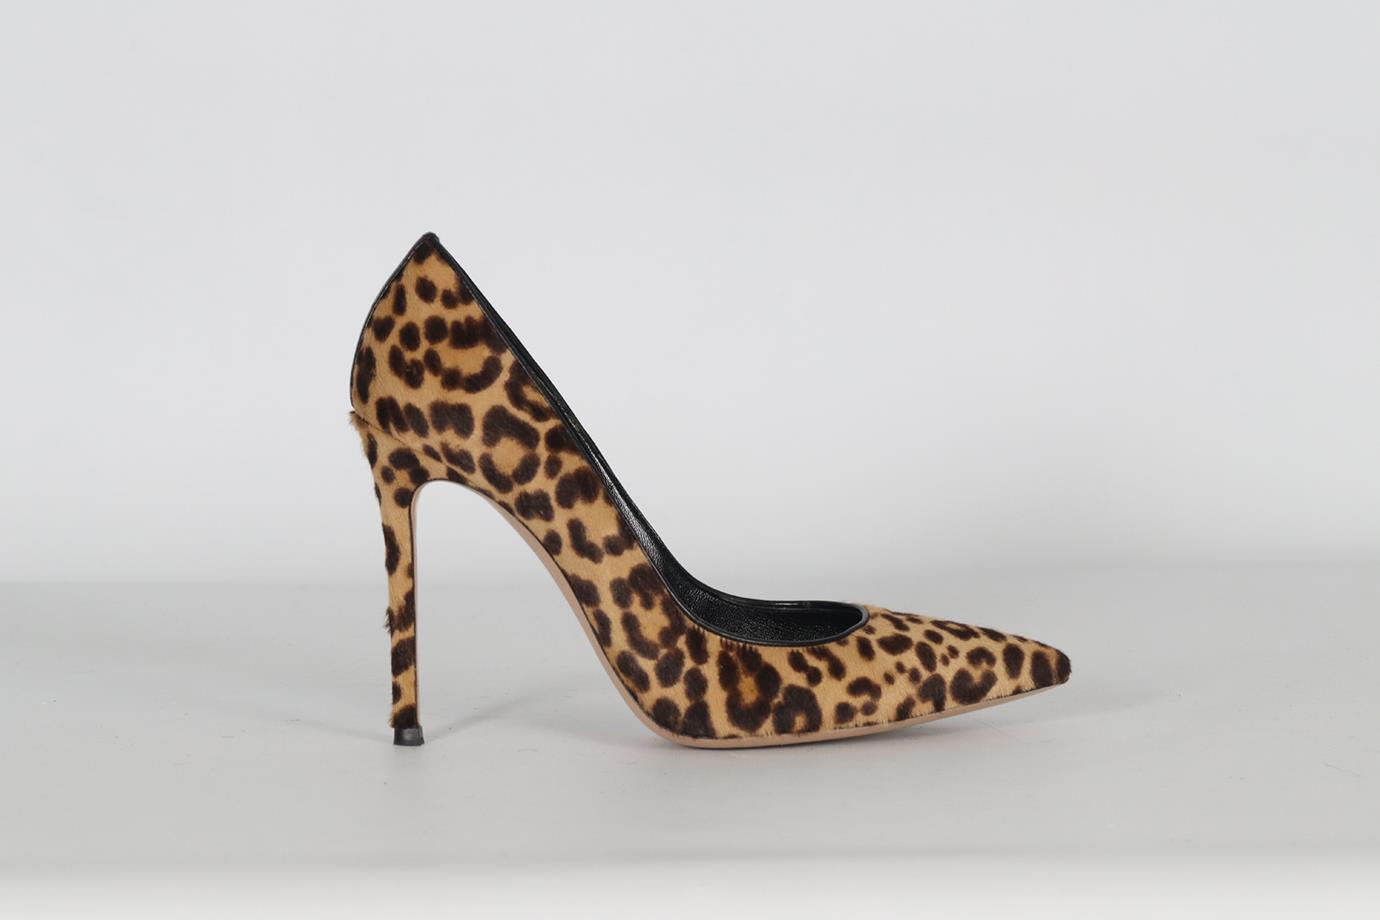 GIANVITO ROSSI CALF HAIR AND LEATHER PUMPS EU 38.5 UK 5.5 US 8.5